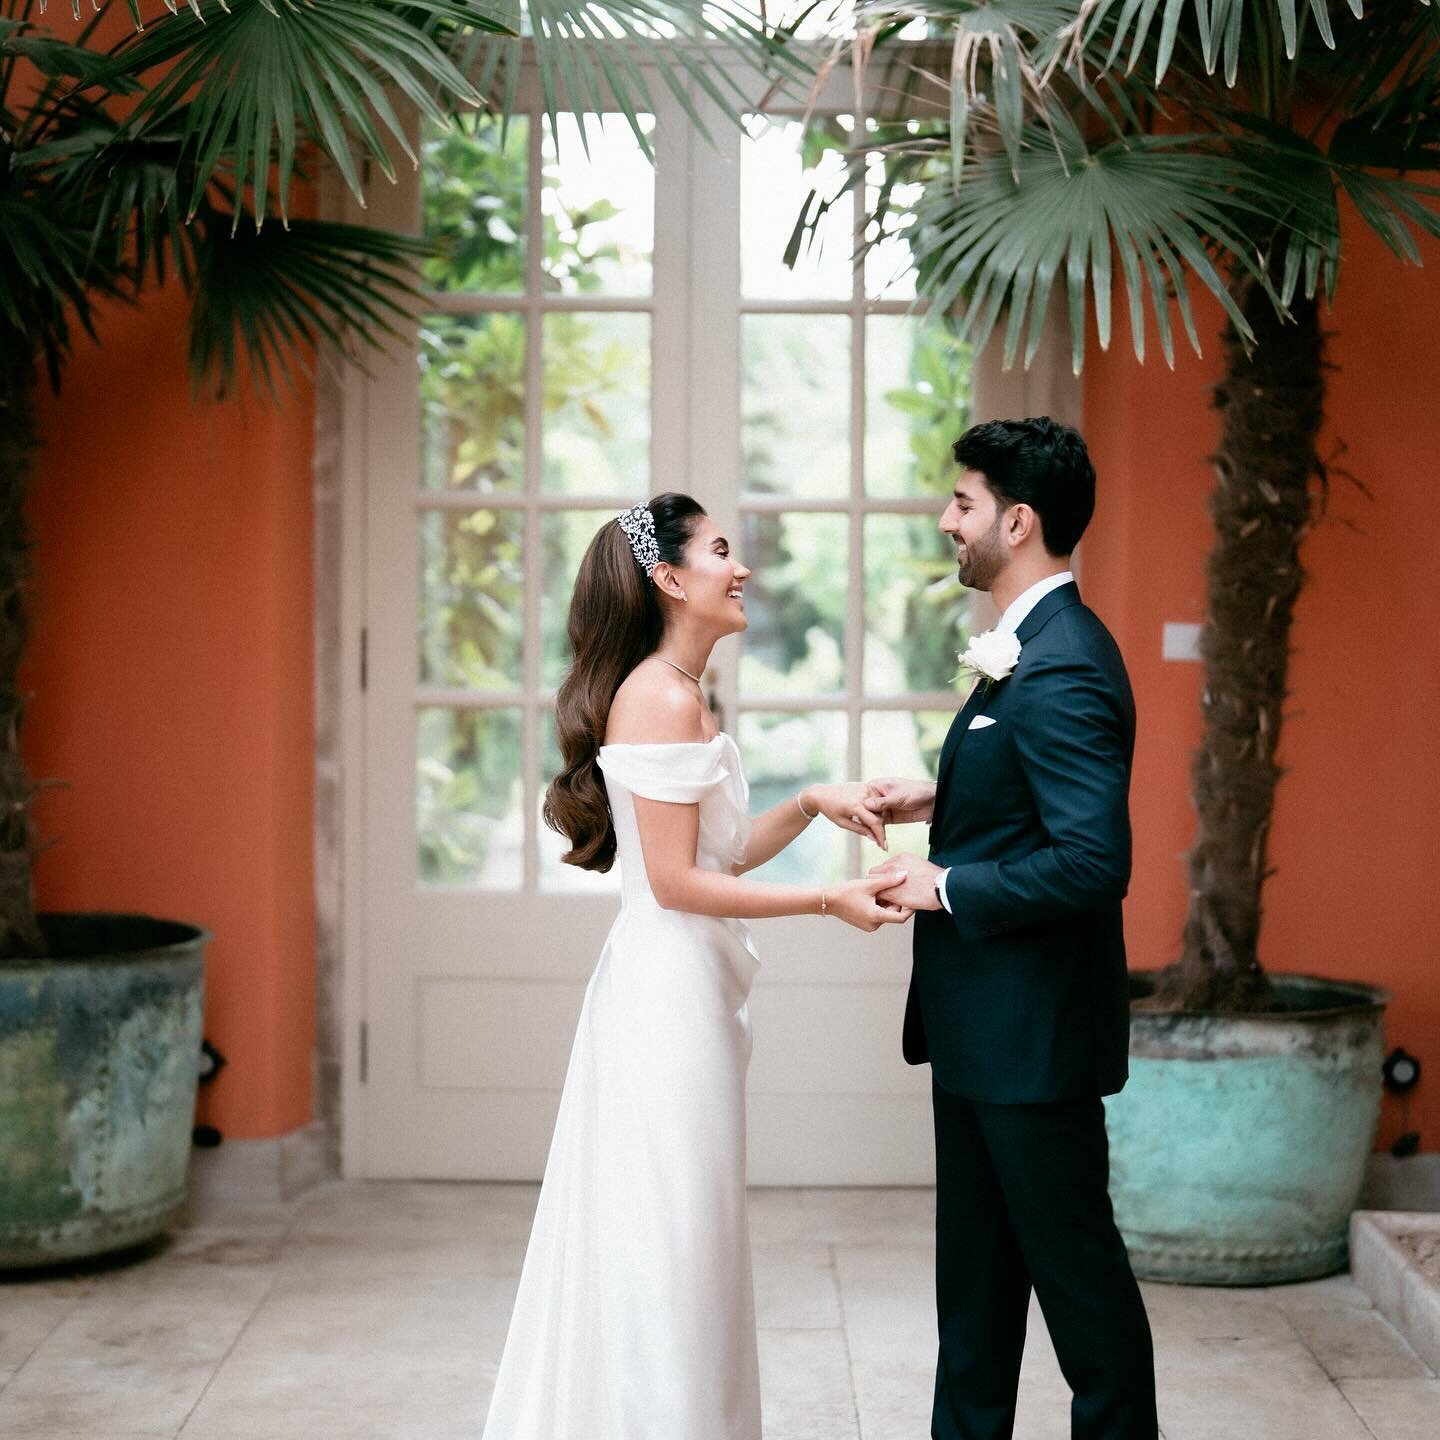 Every time I&rsquo;m particularly tired, I love going through old photos especially from our wedding. Does anybody else do this?! So yeah, I guess I&rsquo;m tired. Here&rsquo;s 10 of my fave photos (some of which you may have seen on Sheerluxe) of a 